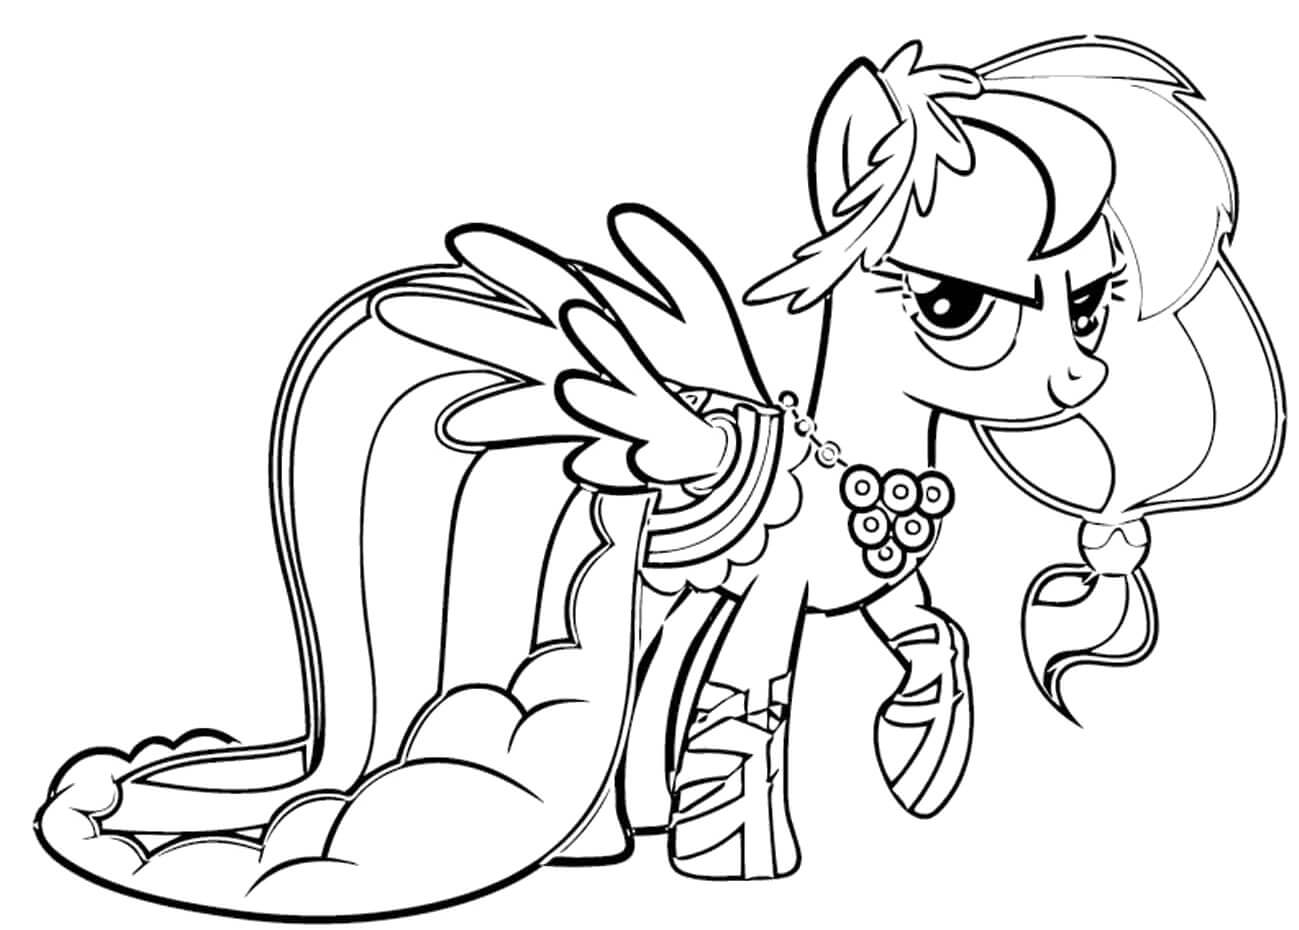 My Little Pony Coloring Pages Rainbow Dash at GetDrawings ...